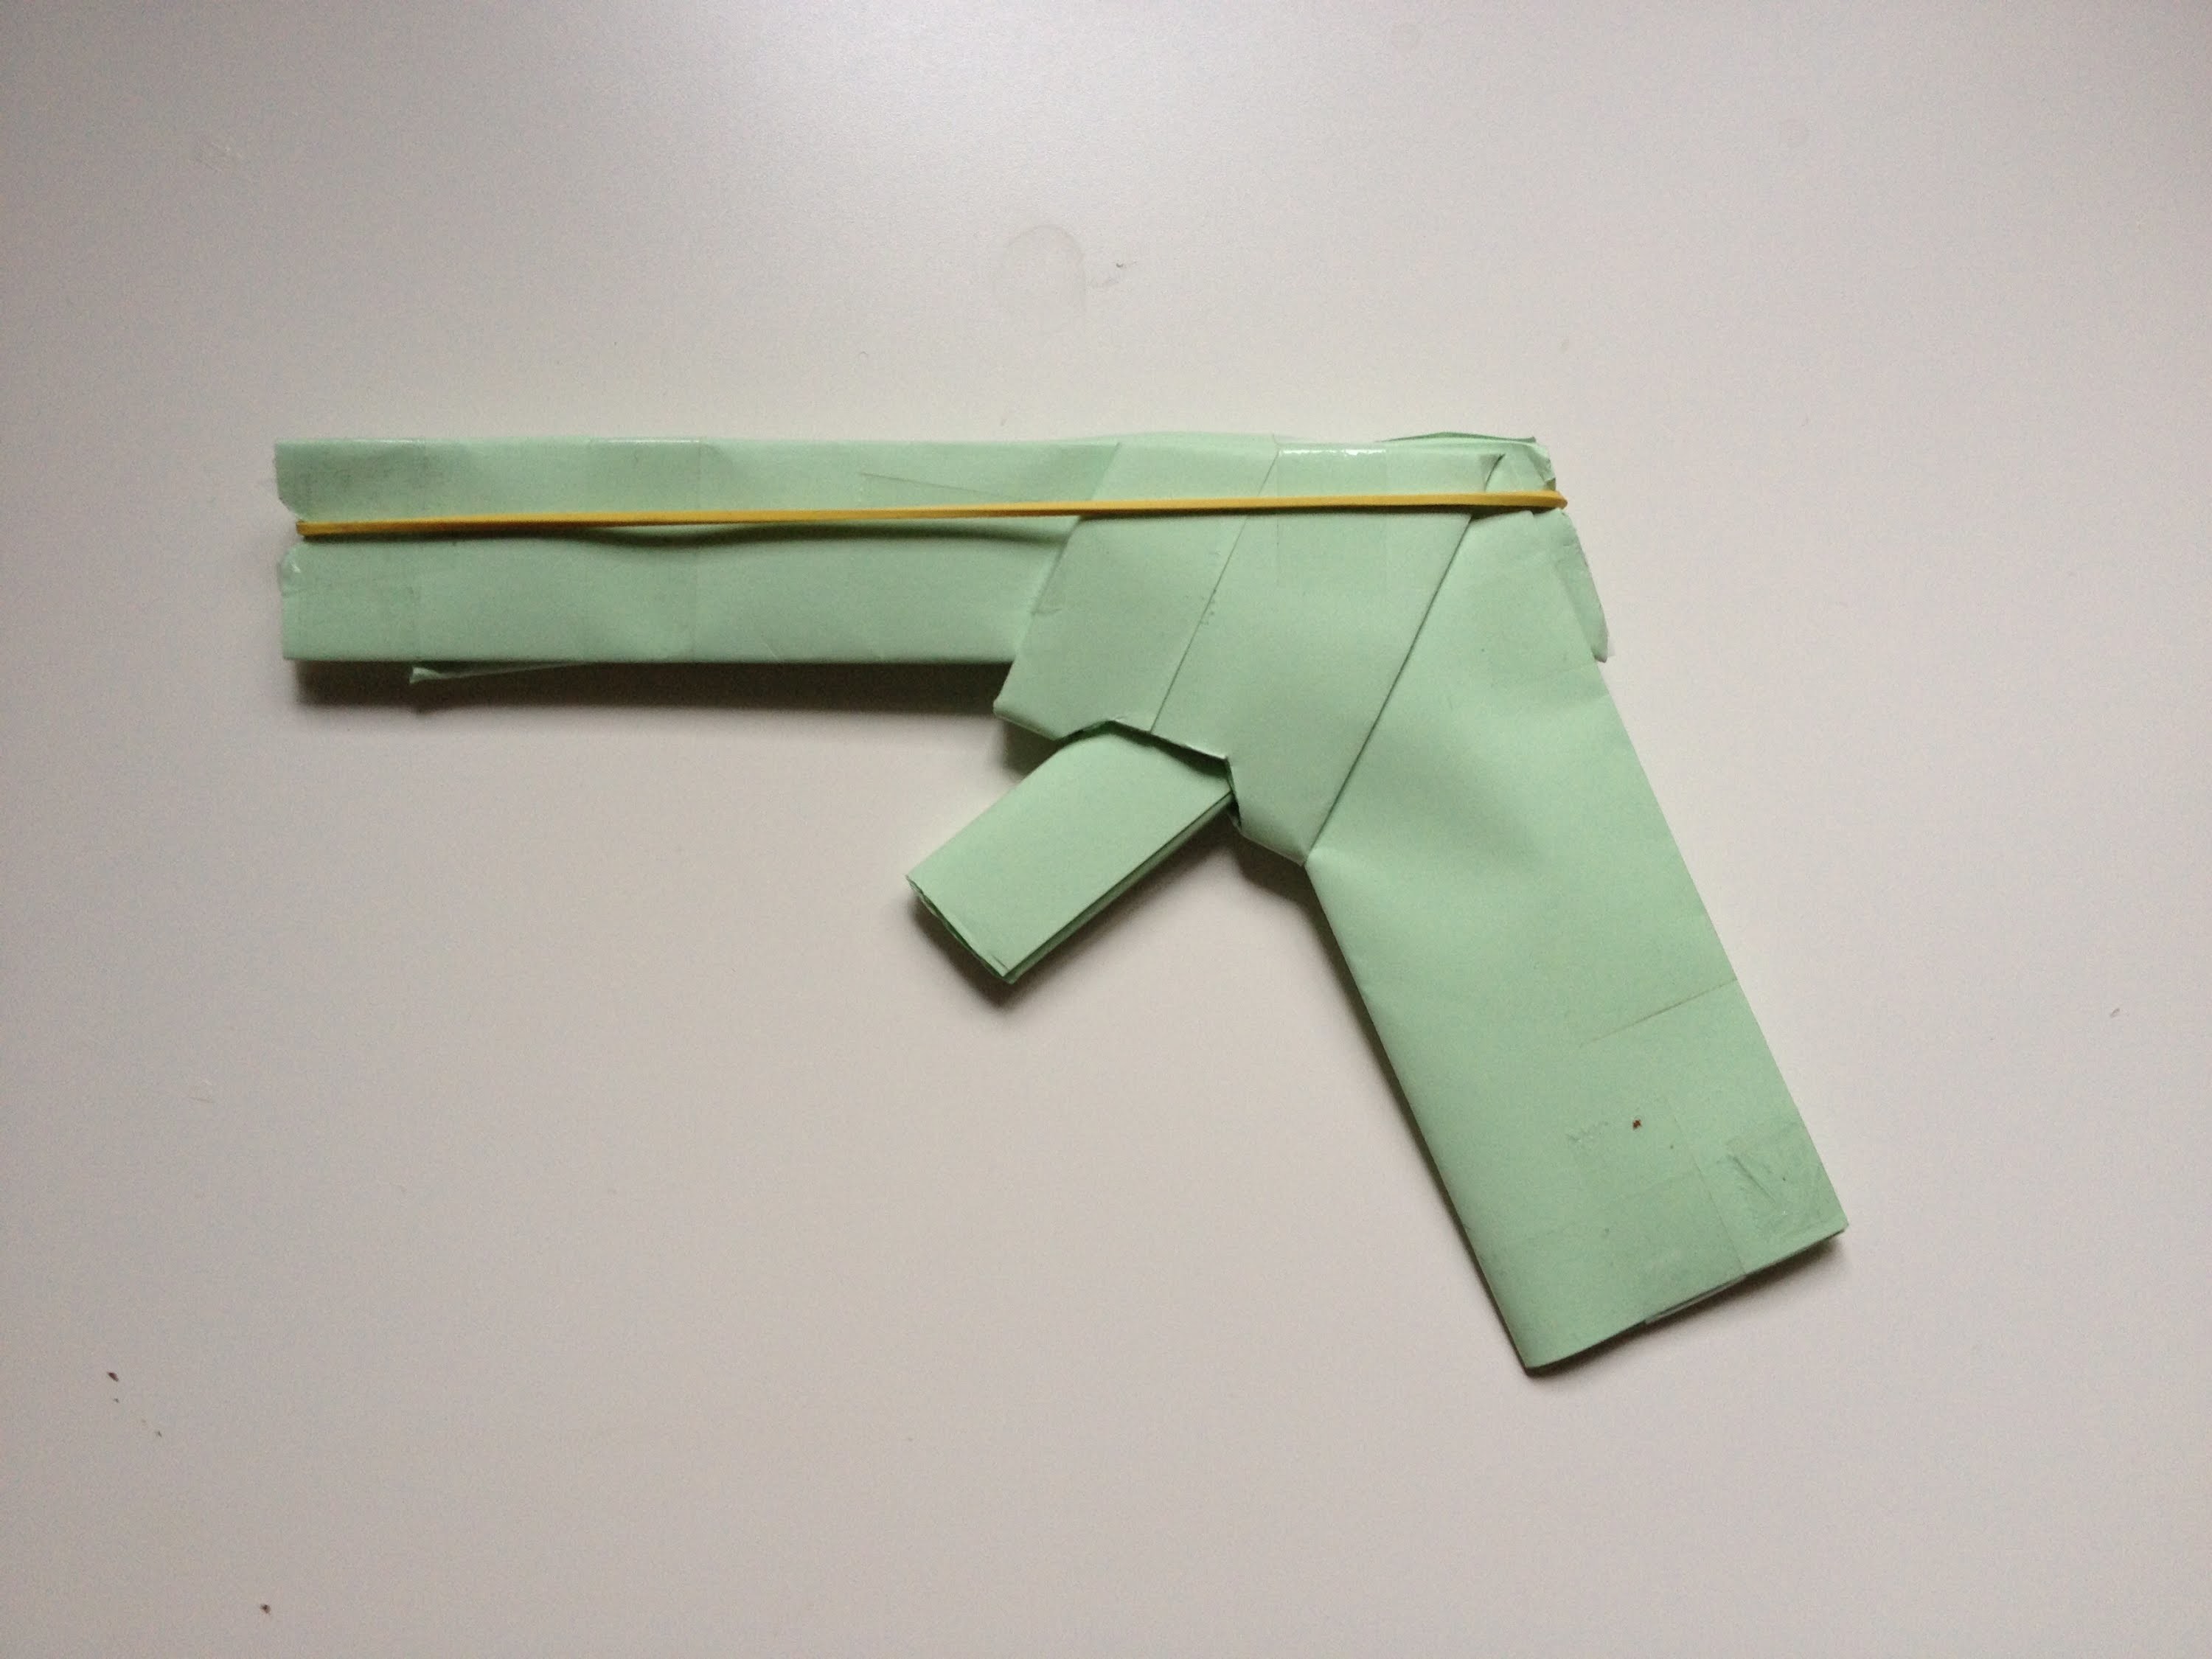 How To Make A Paper Gun That Shoots Rubber Bands (With Trigger). (Easy) (HD)